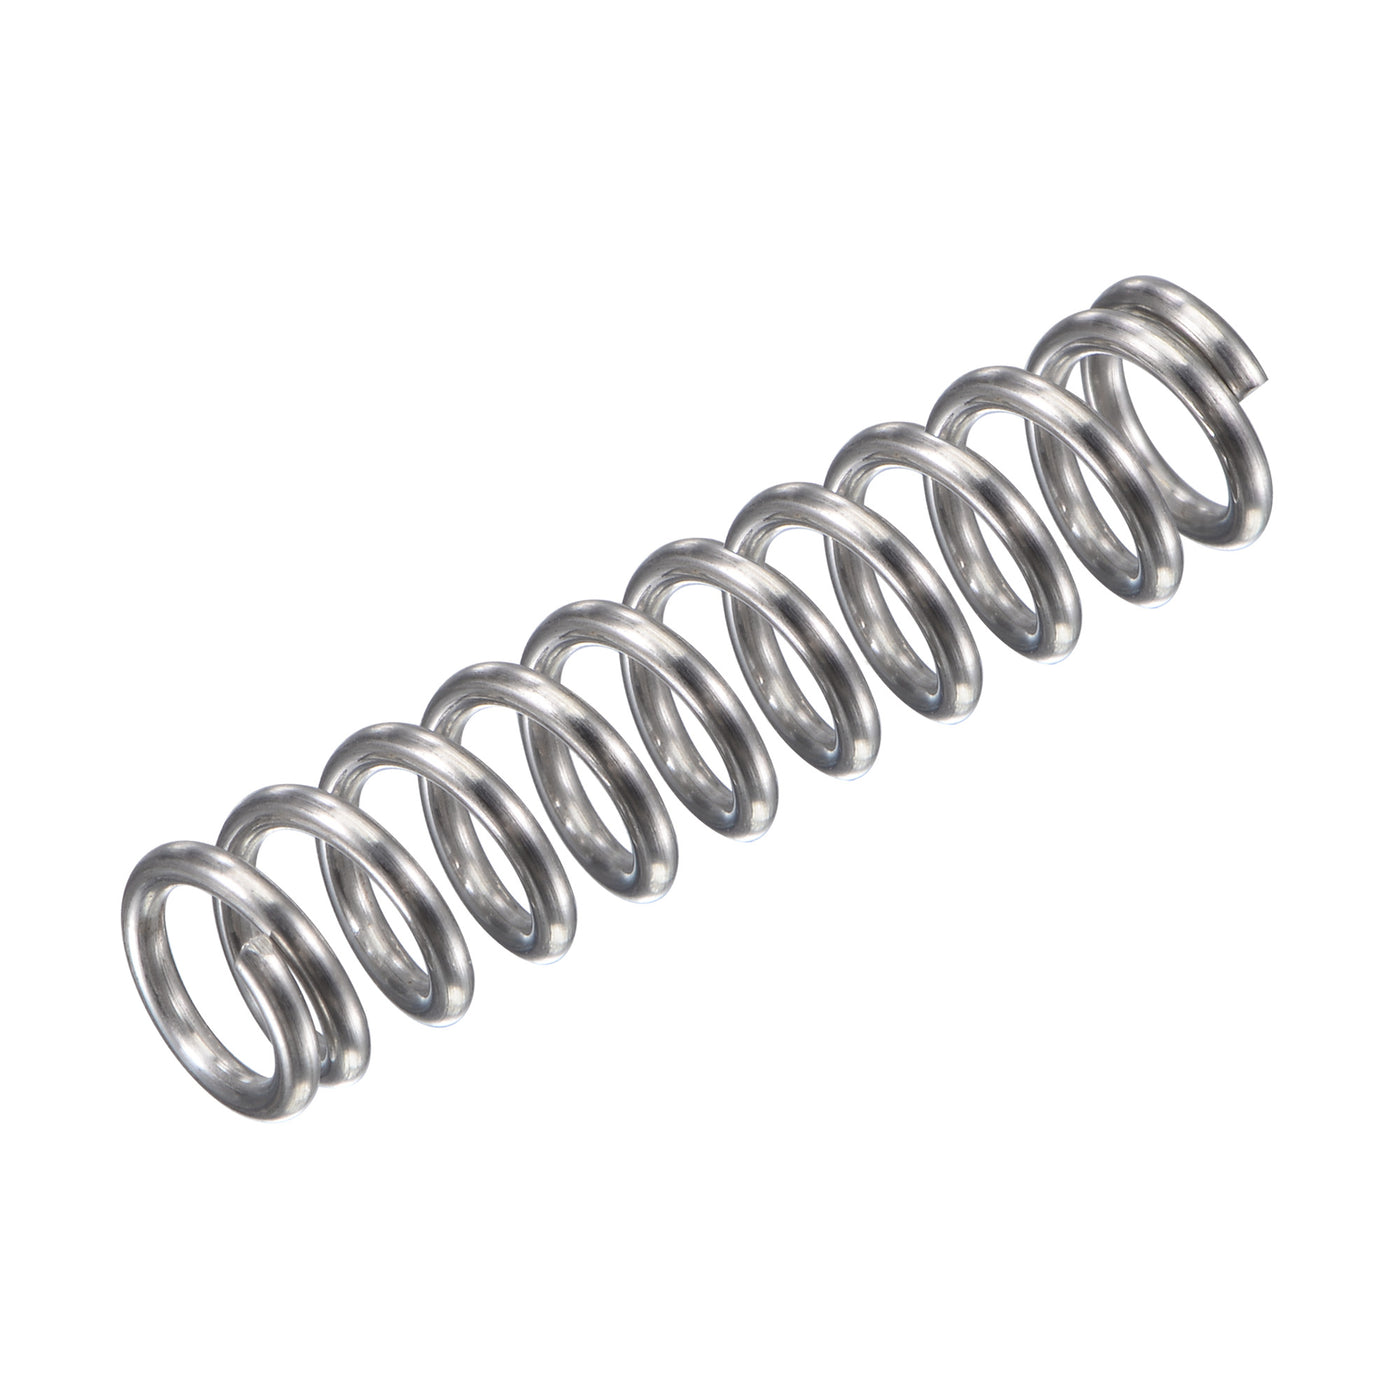 uxcell Uxcell 8mmx1.2mmx35mm 304 Stainless Steel Compression Spring 61.8N Load Capacity 15pcs